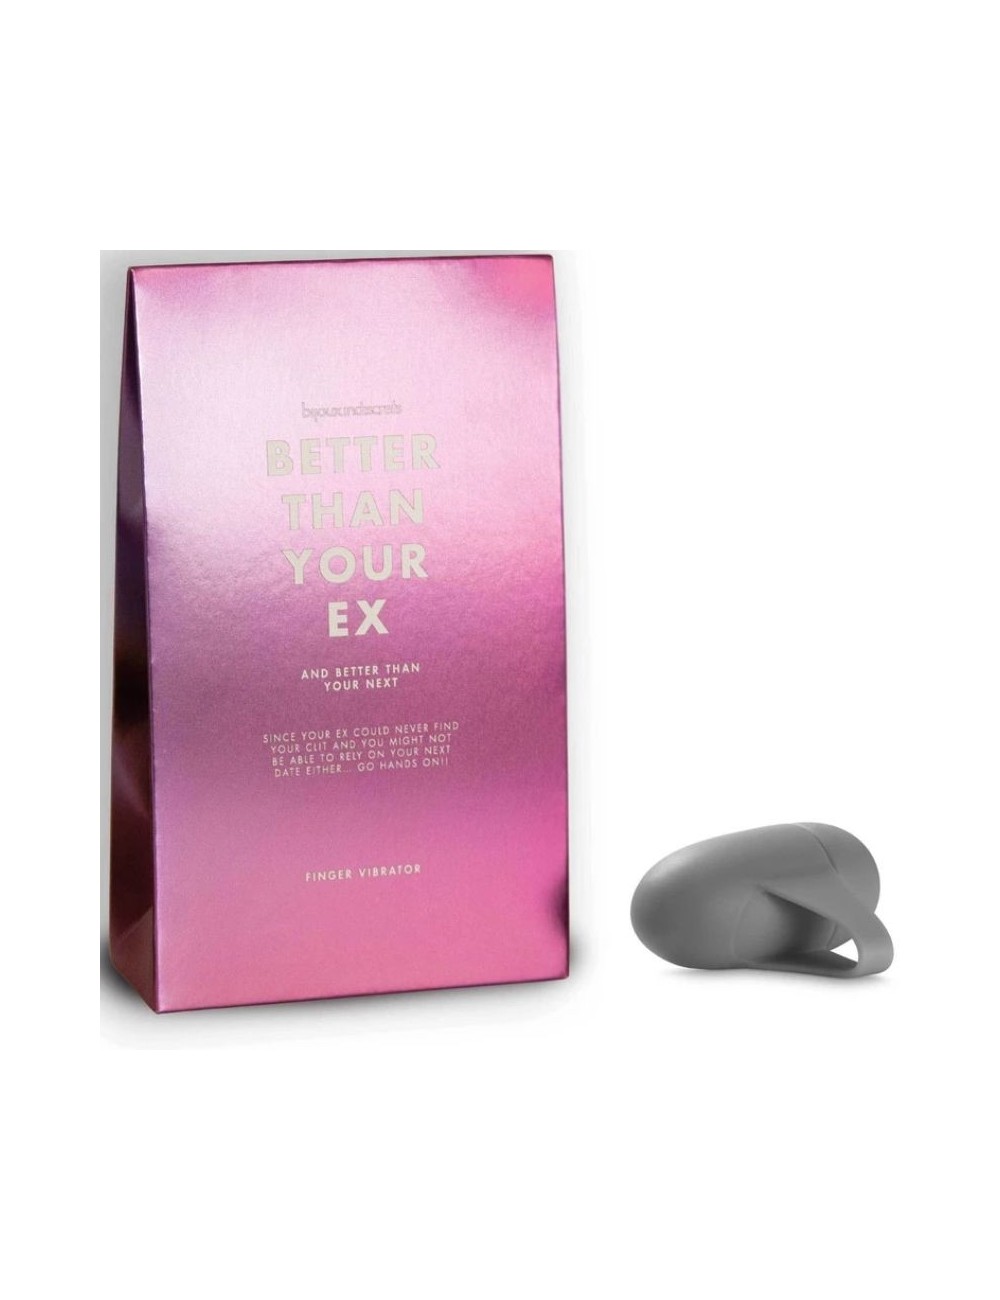 BIJOUX CLITHERAPY VIBRATING FINGERTIP BETTER THAN YOUR EX